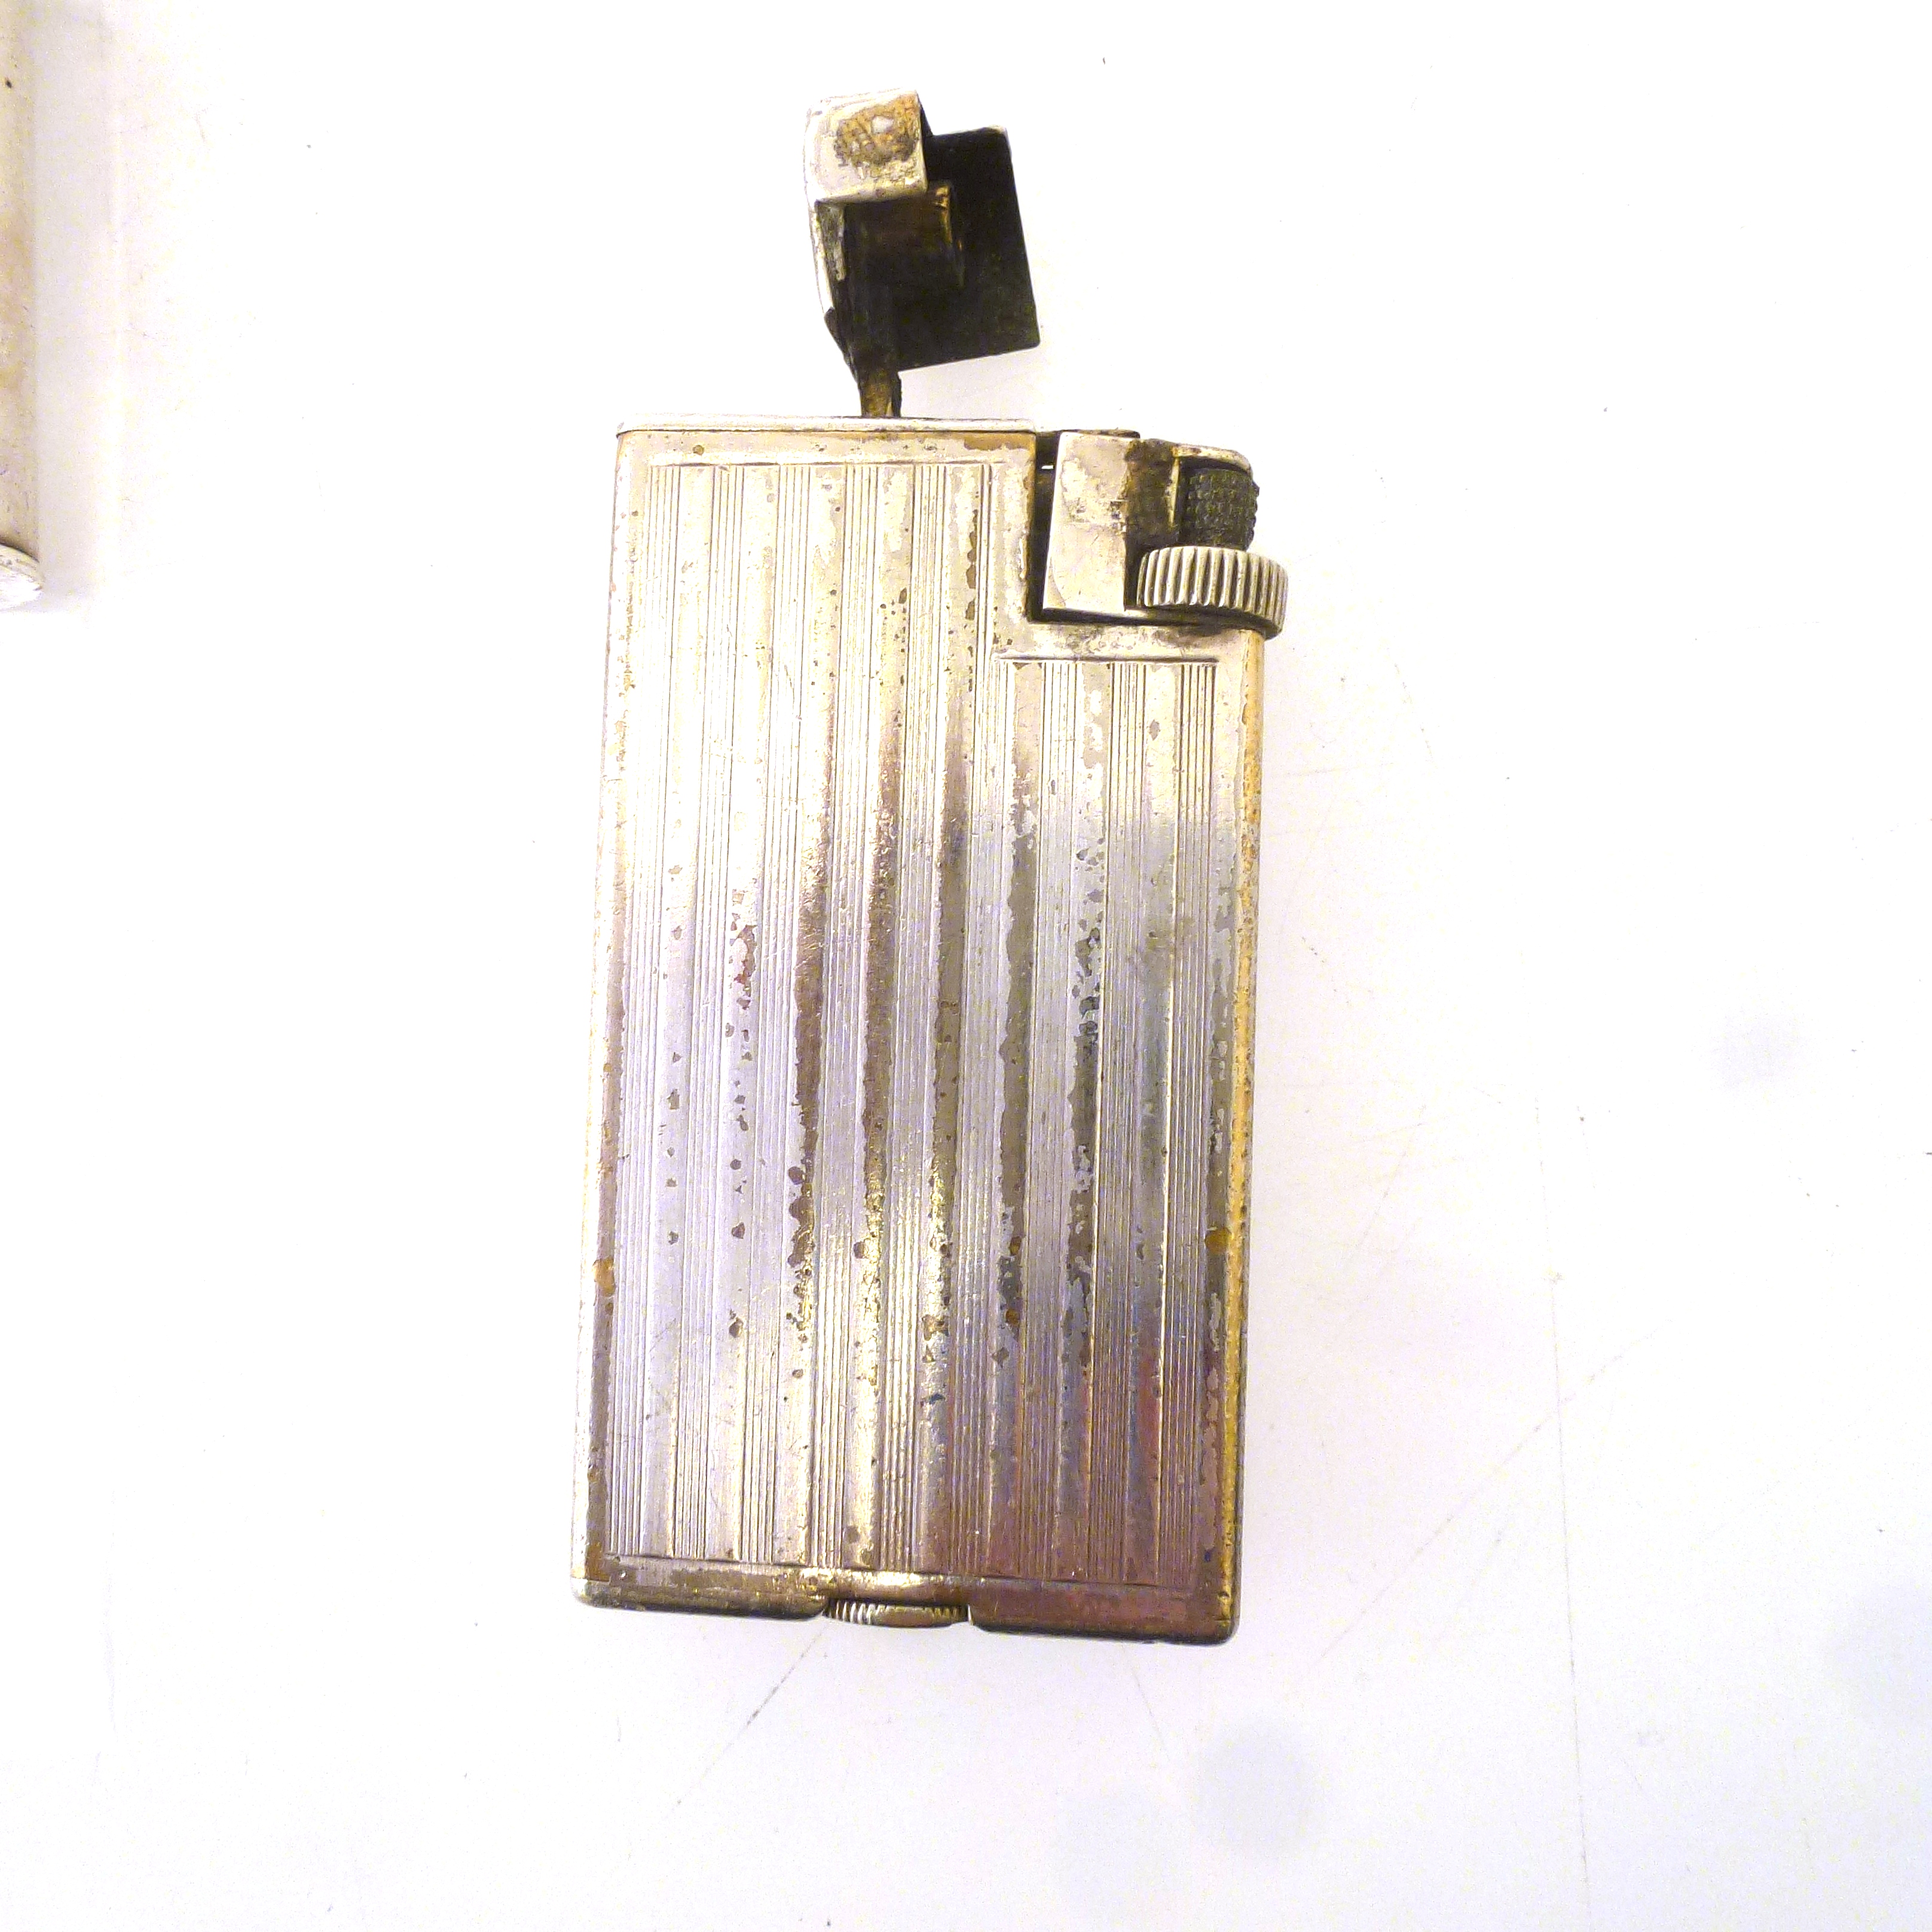 2 DUNHILL LIGHTERS - Image 4 of 5